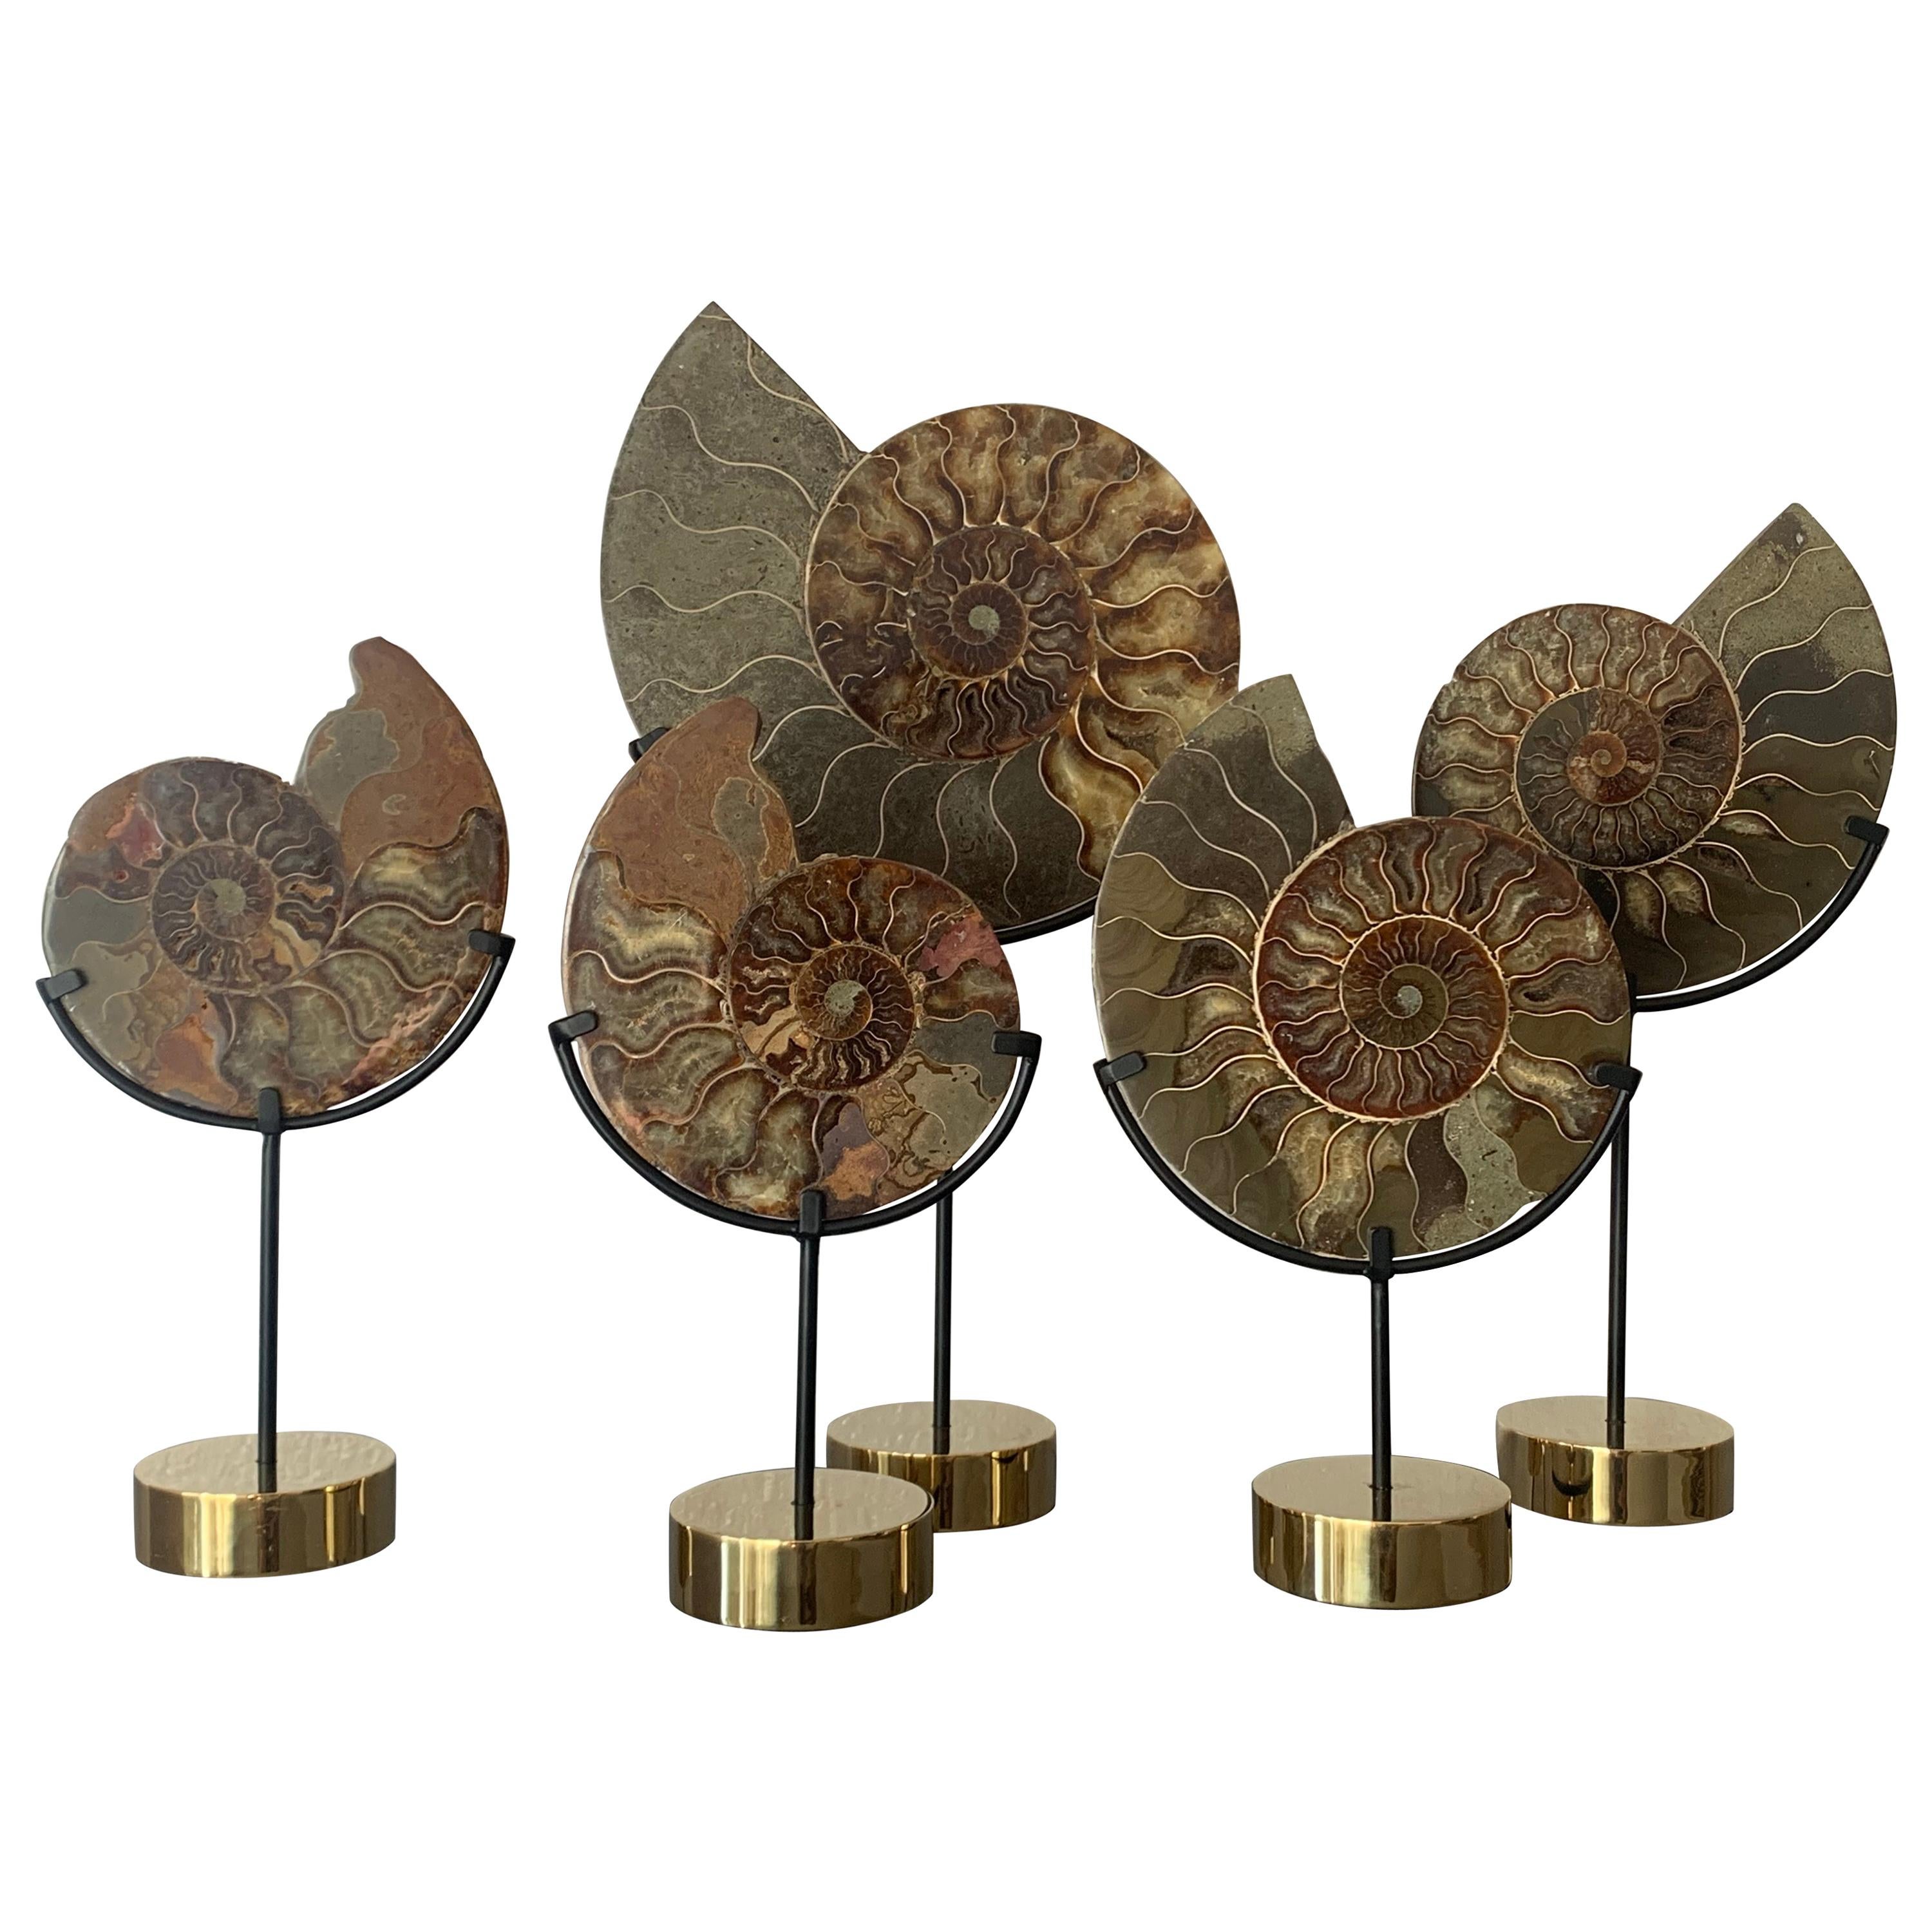 Set of Five Ammonite Fossils on Brass Base